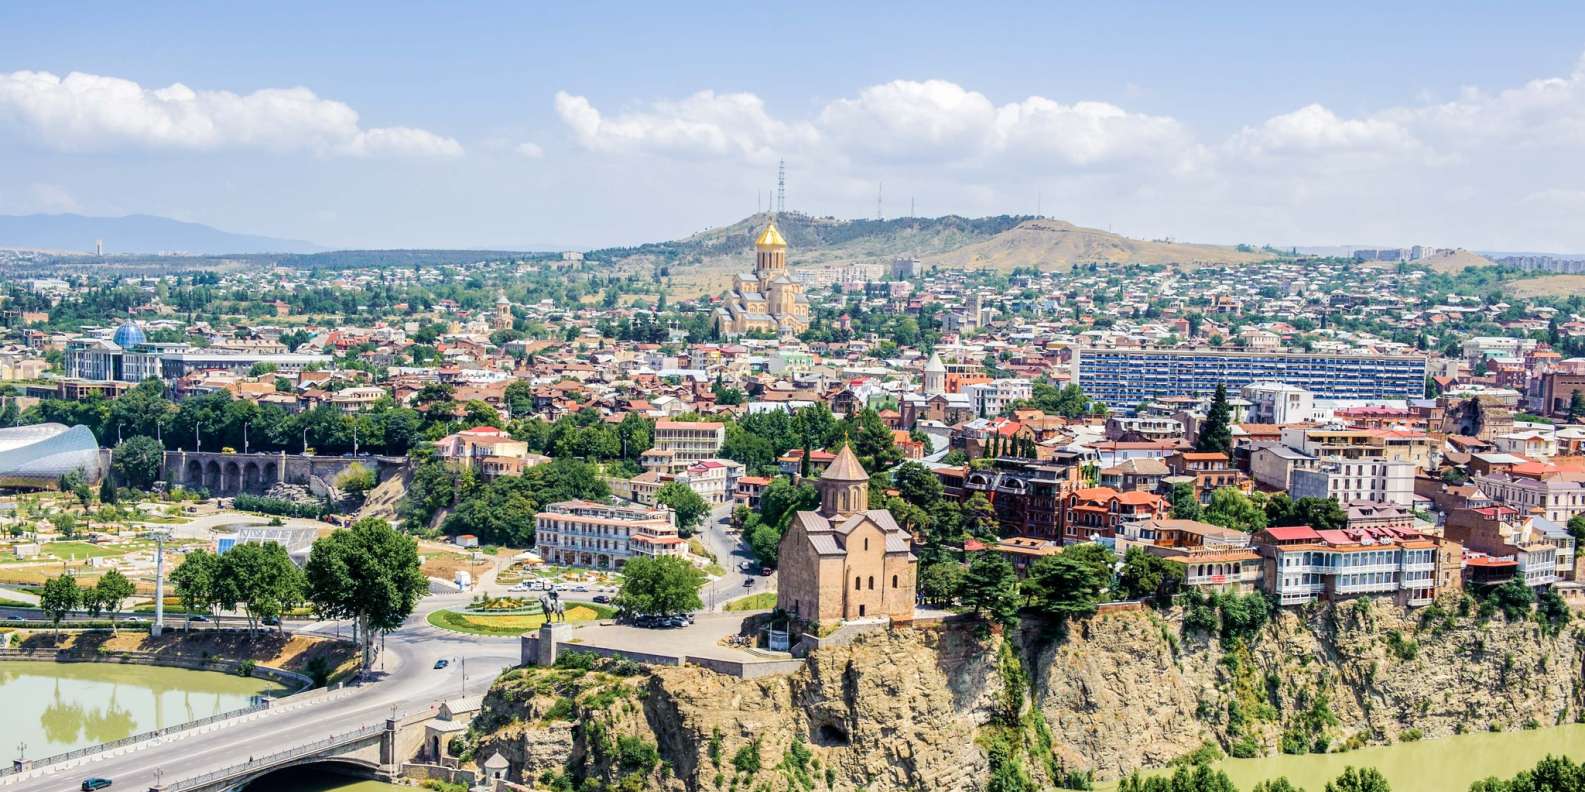 The BEST Tbilisi Meet the locals 2022 - FREE Cancellation ...